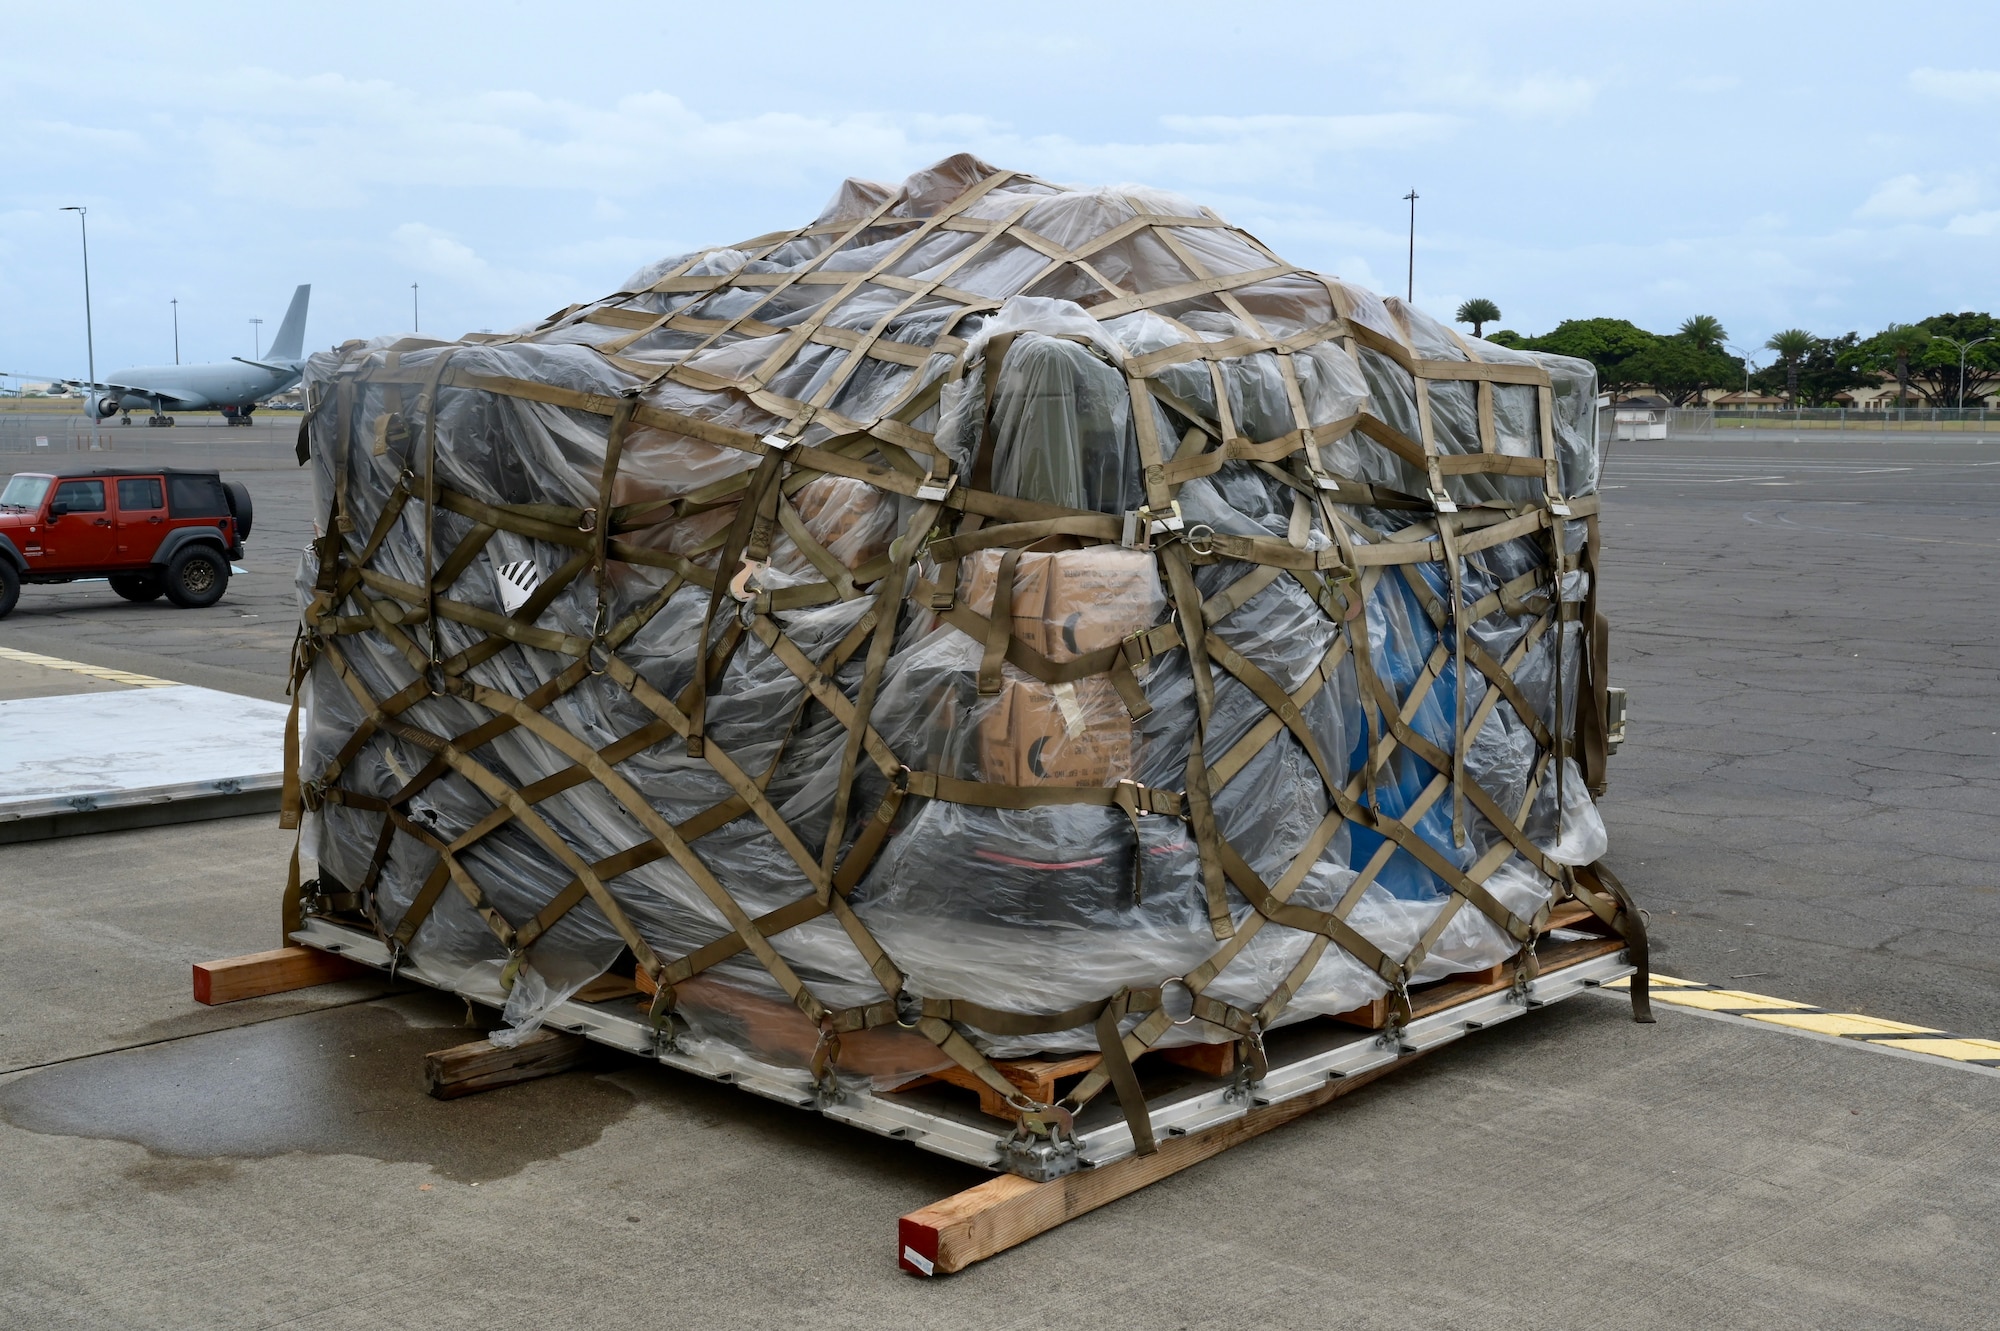 A fully prepared cargo pallet sits ready to go after being prepped by Airmen participating in a Multi-Capable Airmen training Tier 1 class at Joint Base Pearl Harbor-Hickam, Hawaii, May 18, 2022. The MCA training is poised to directly support the Agile Combat Employment doctrine by training Airmen to be able with skills outside their primary career field duties. (U.S. Air Force photo by 1st Lt. Benjamin Aronson)